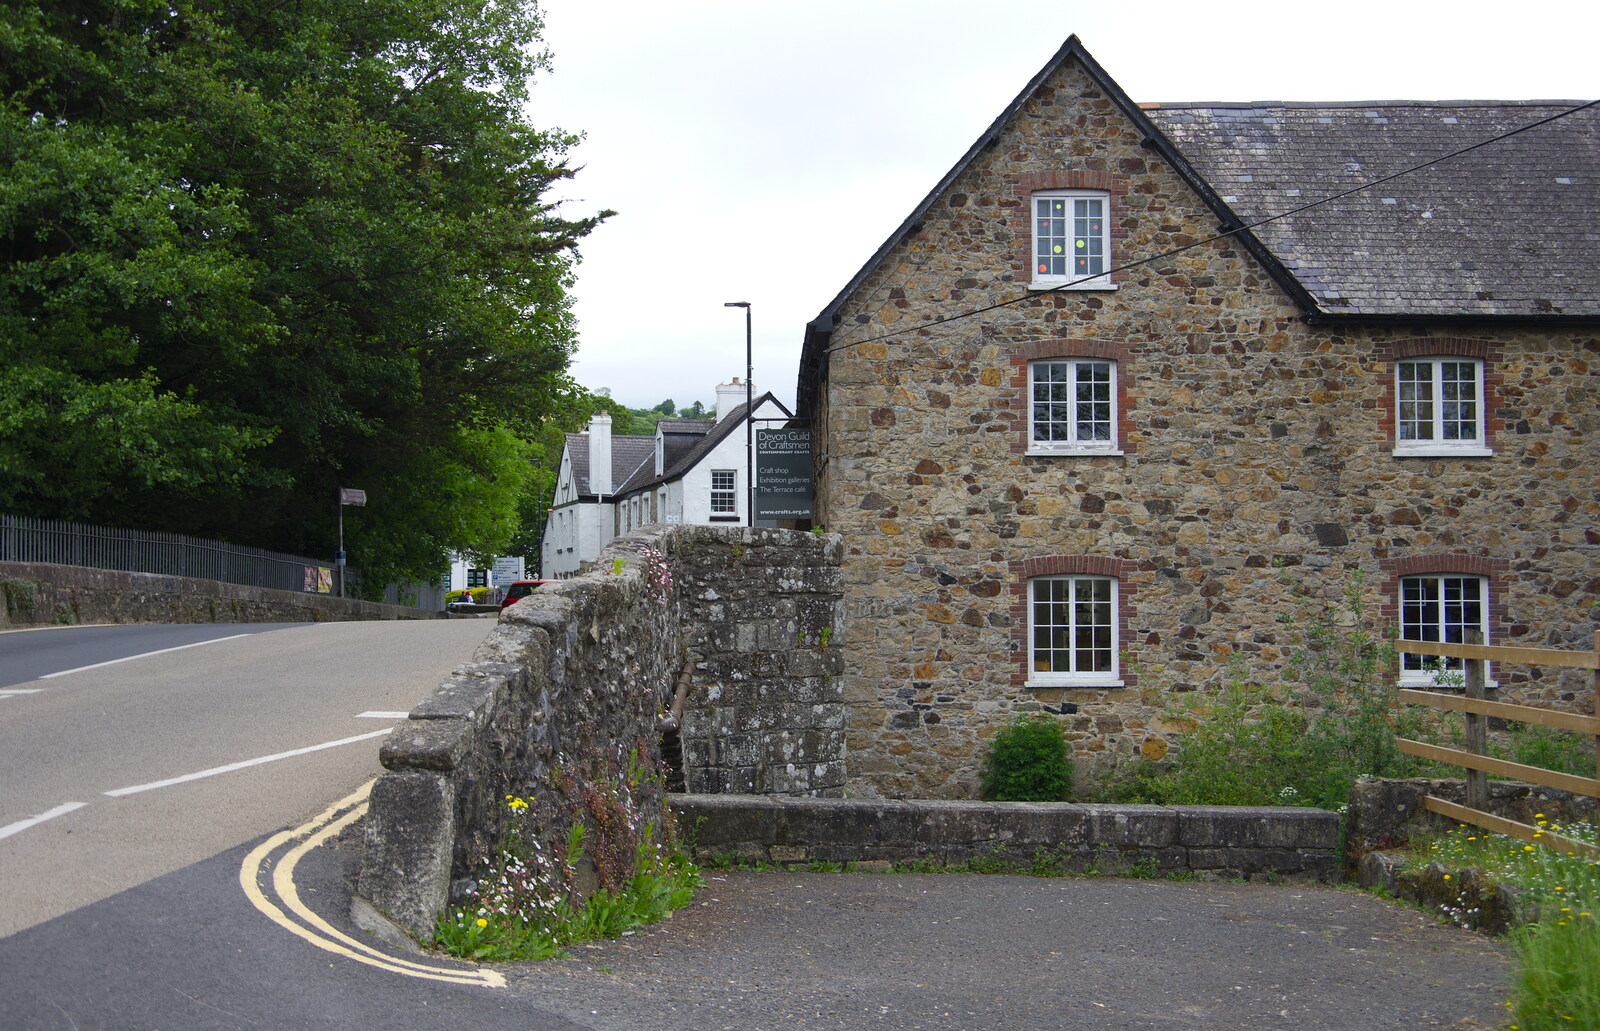 Looking up the street by the mill from The Tom Cobley and a Return to Haytor, Bovey Tracey, Devon - 27th May 2019